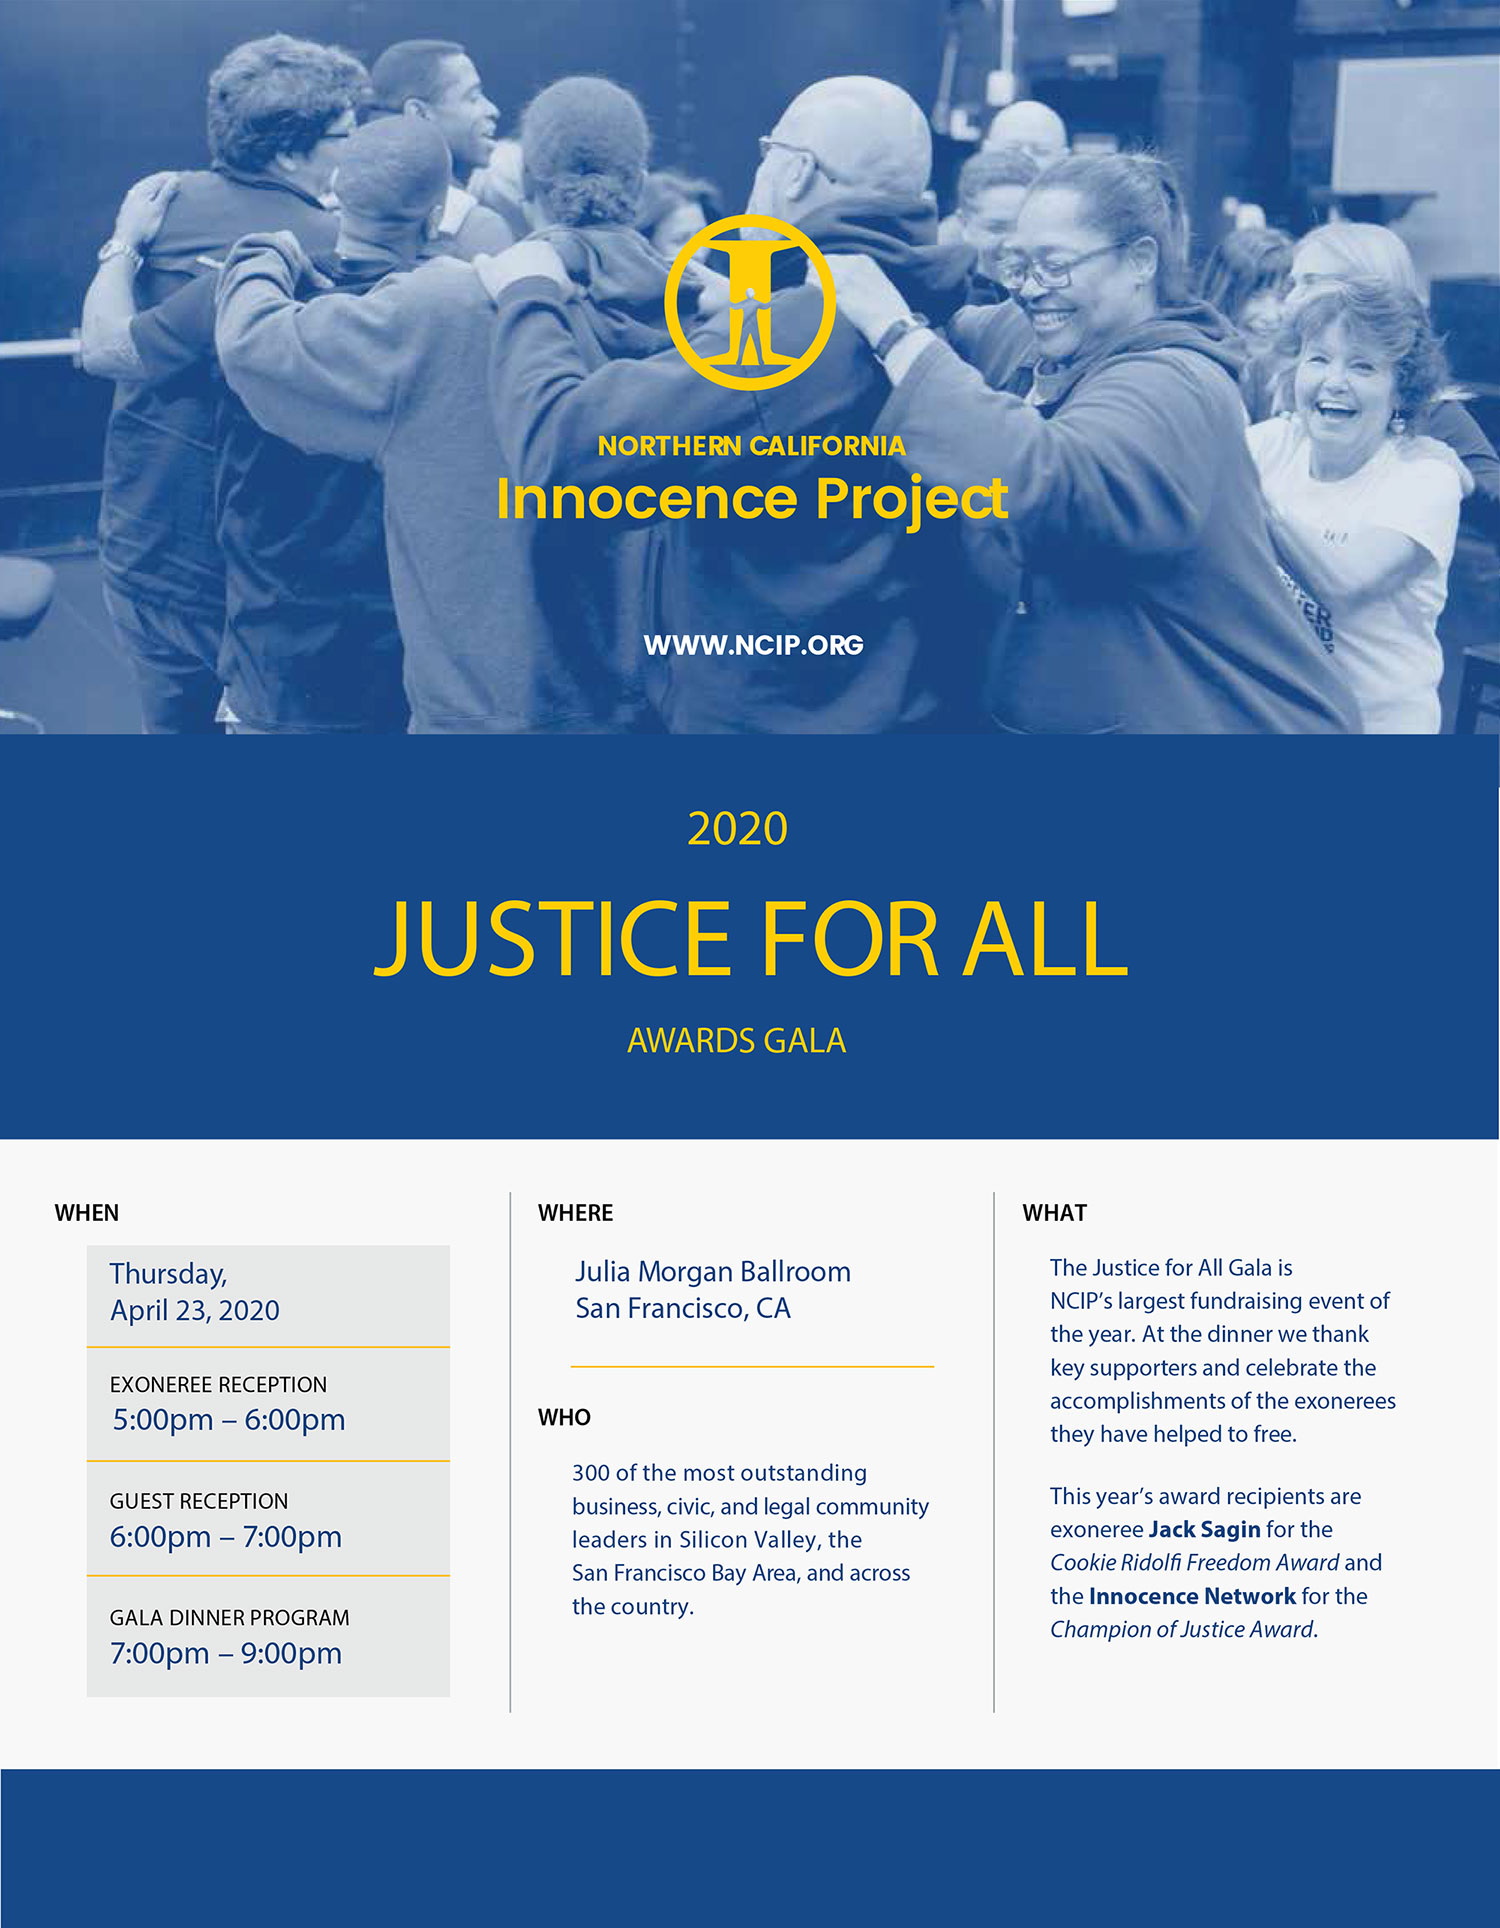 Northern California Innocence Project's 2020 Justice for all Awards Dinner